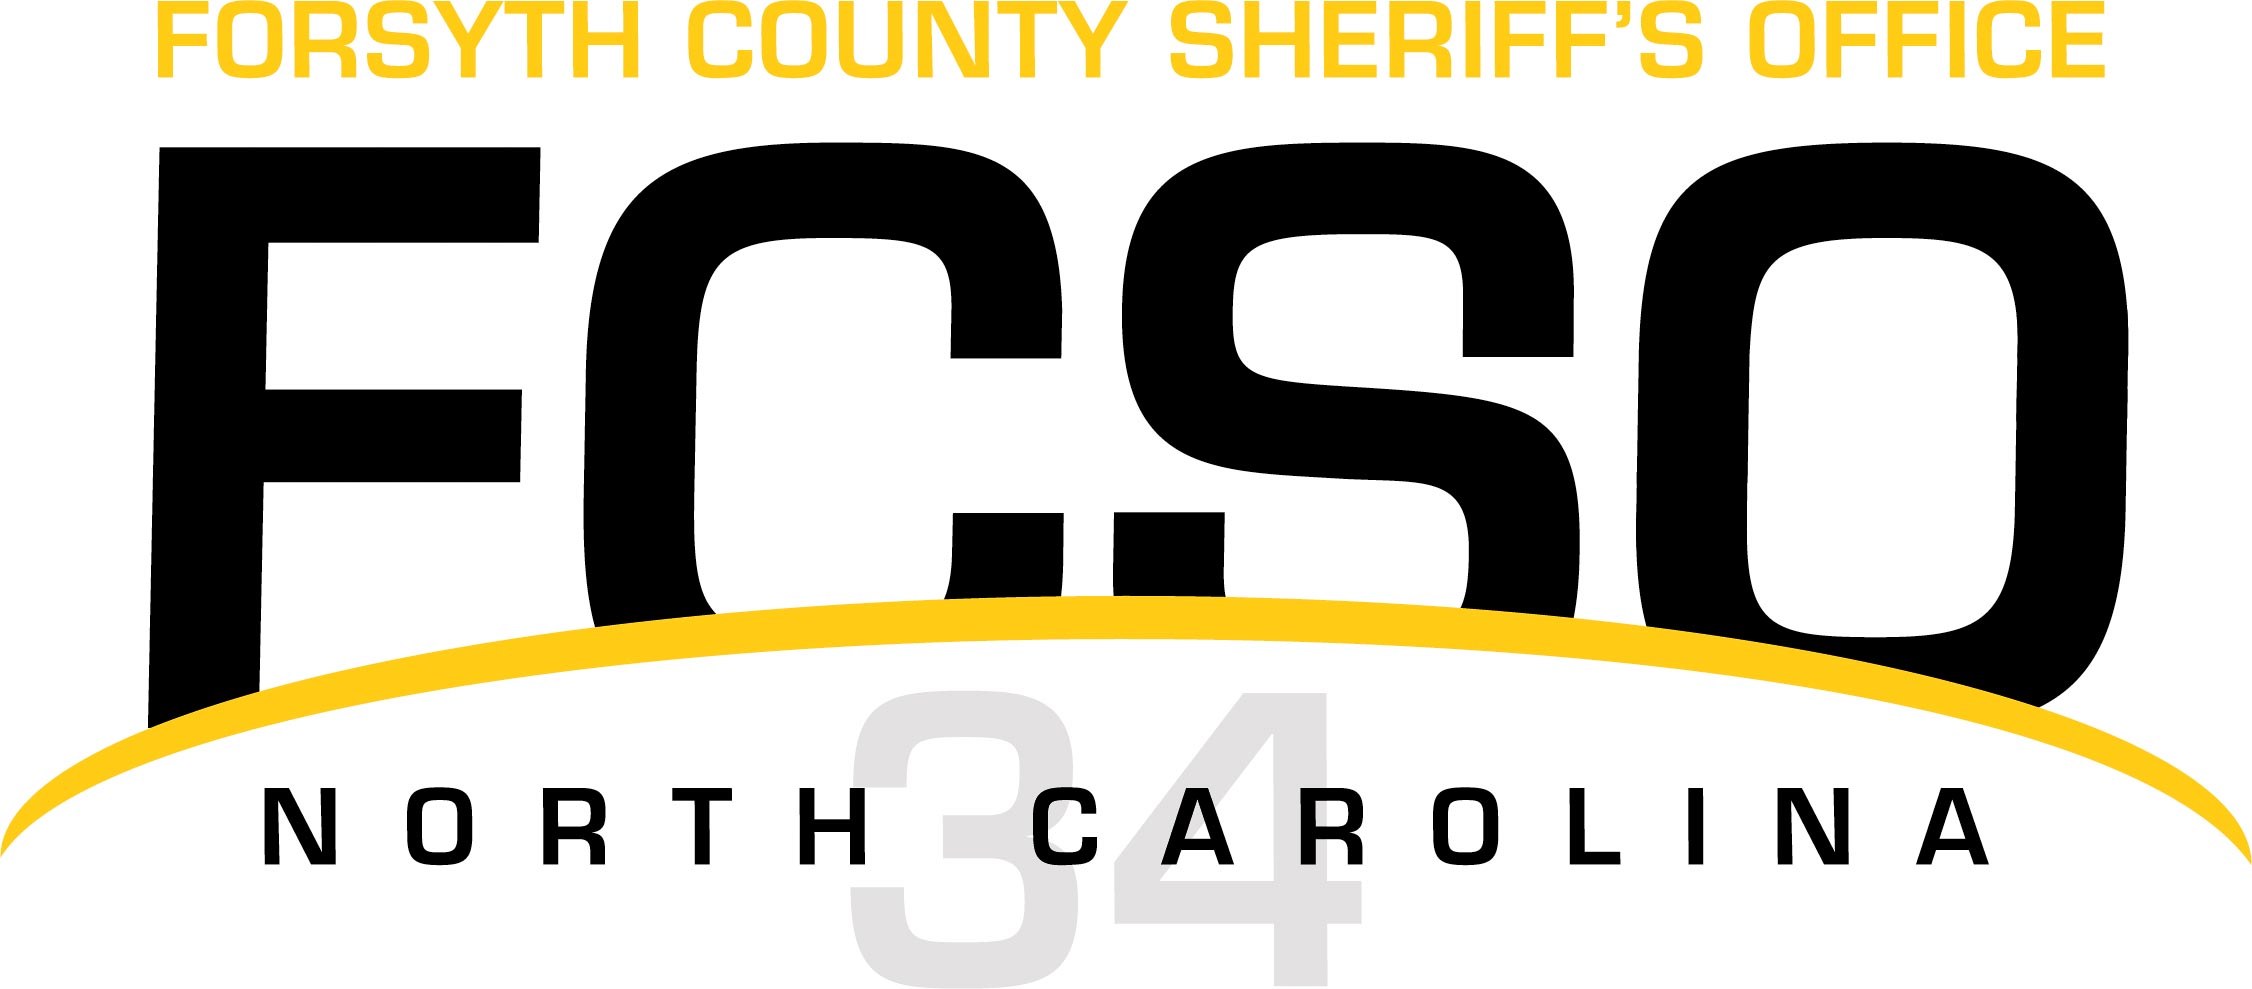 Forsyth County Sheriff's Office Recruitment